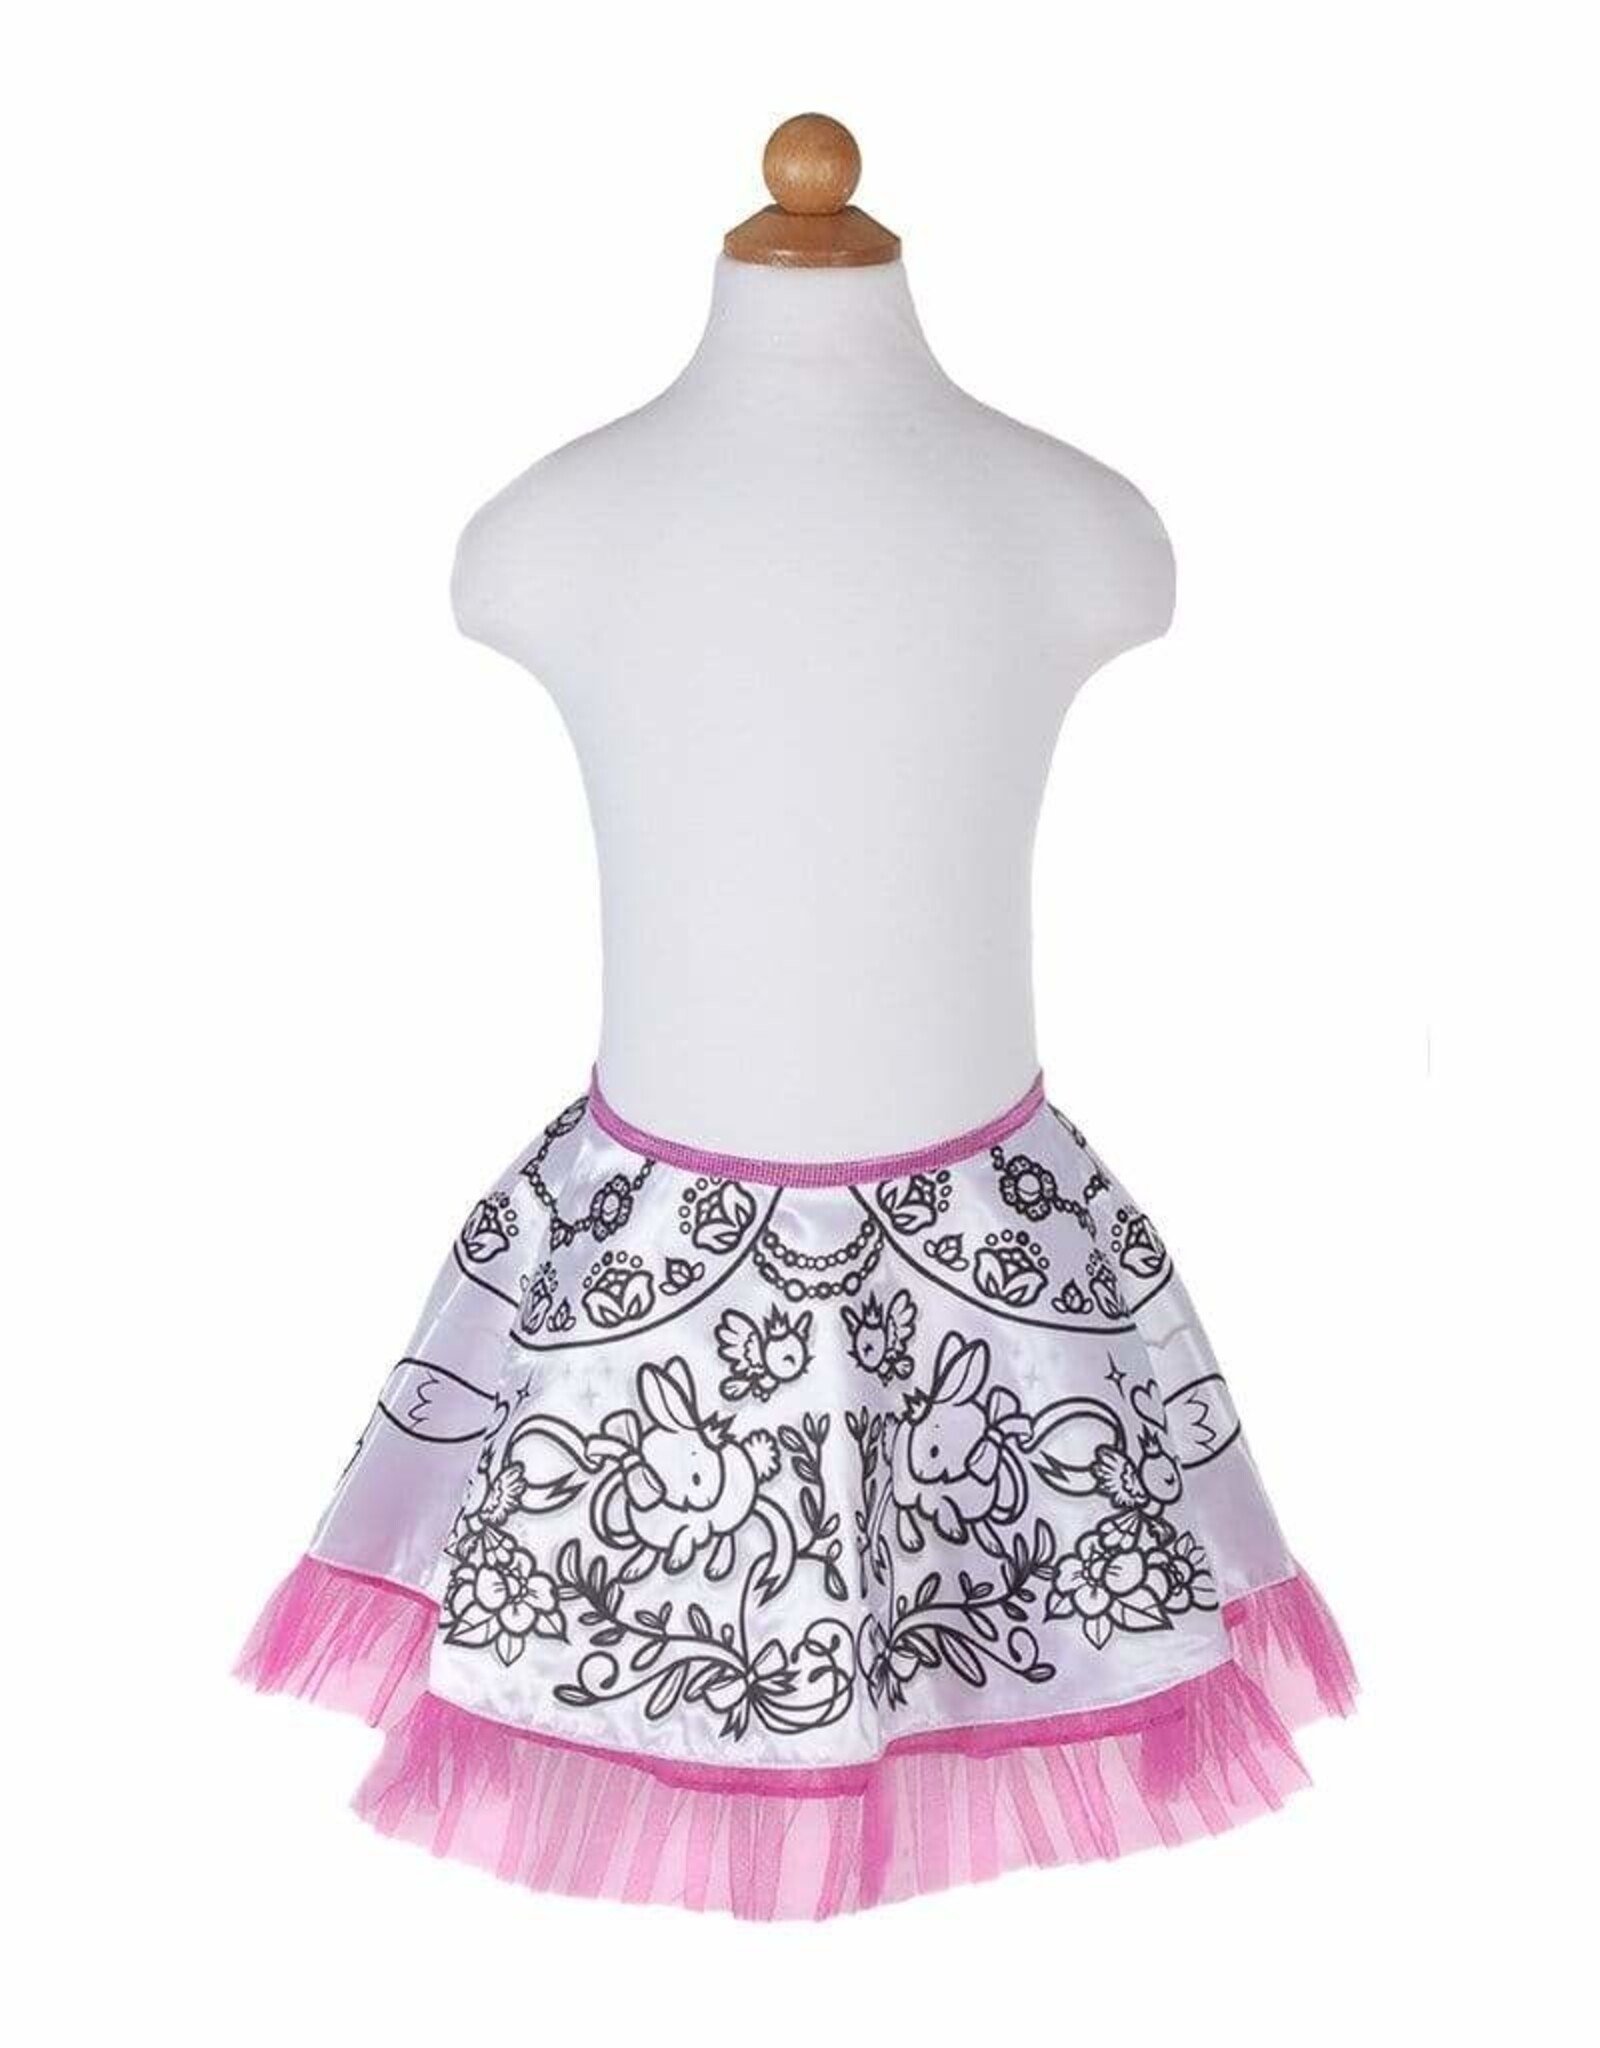 Great Pretenders Colour-A-Skirt, Size 4-6